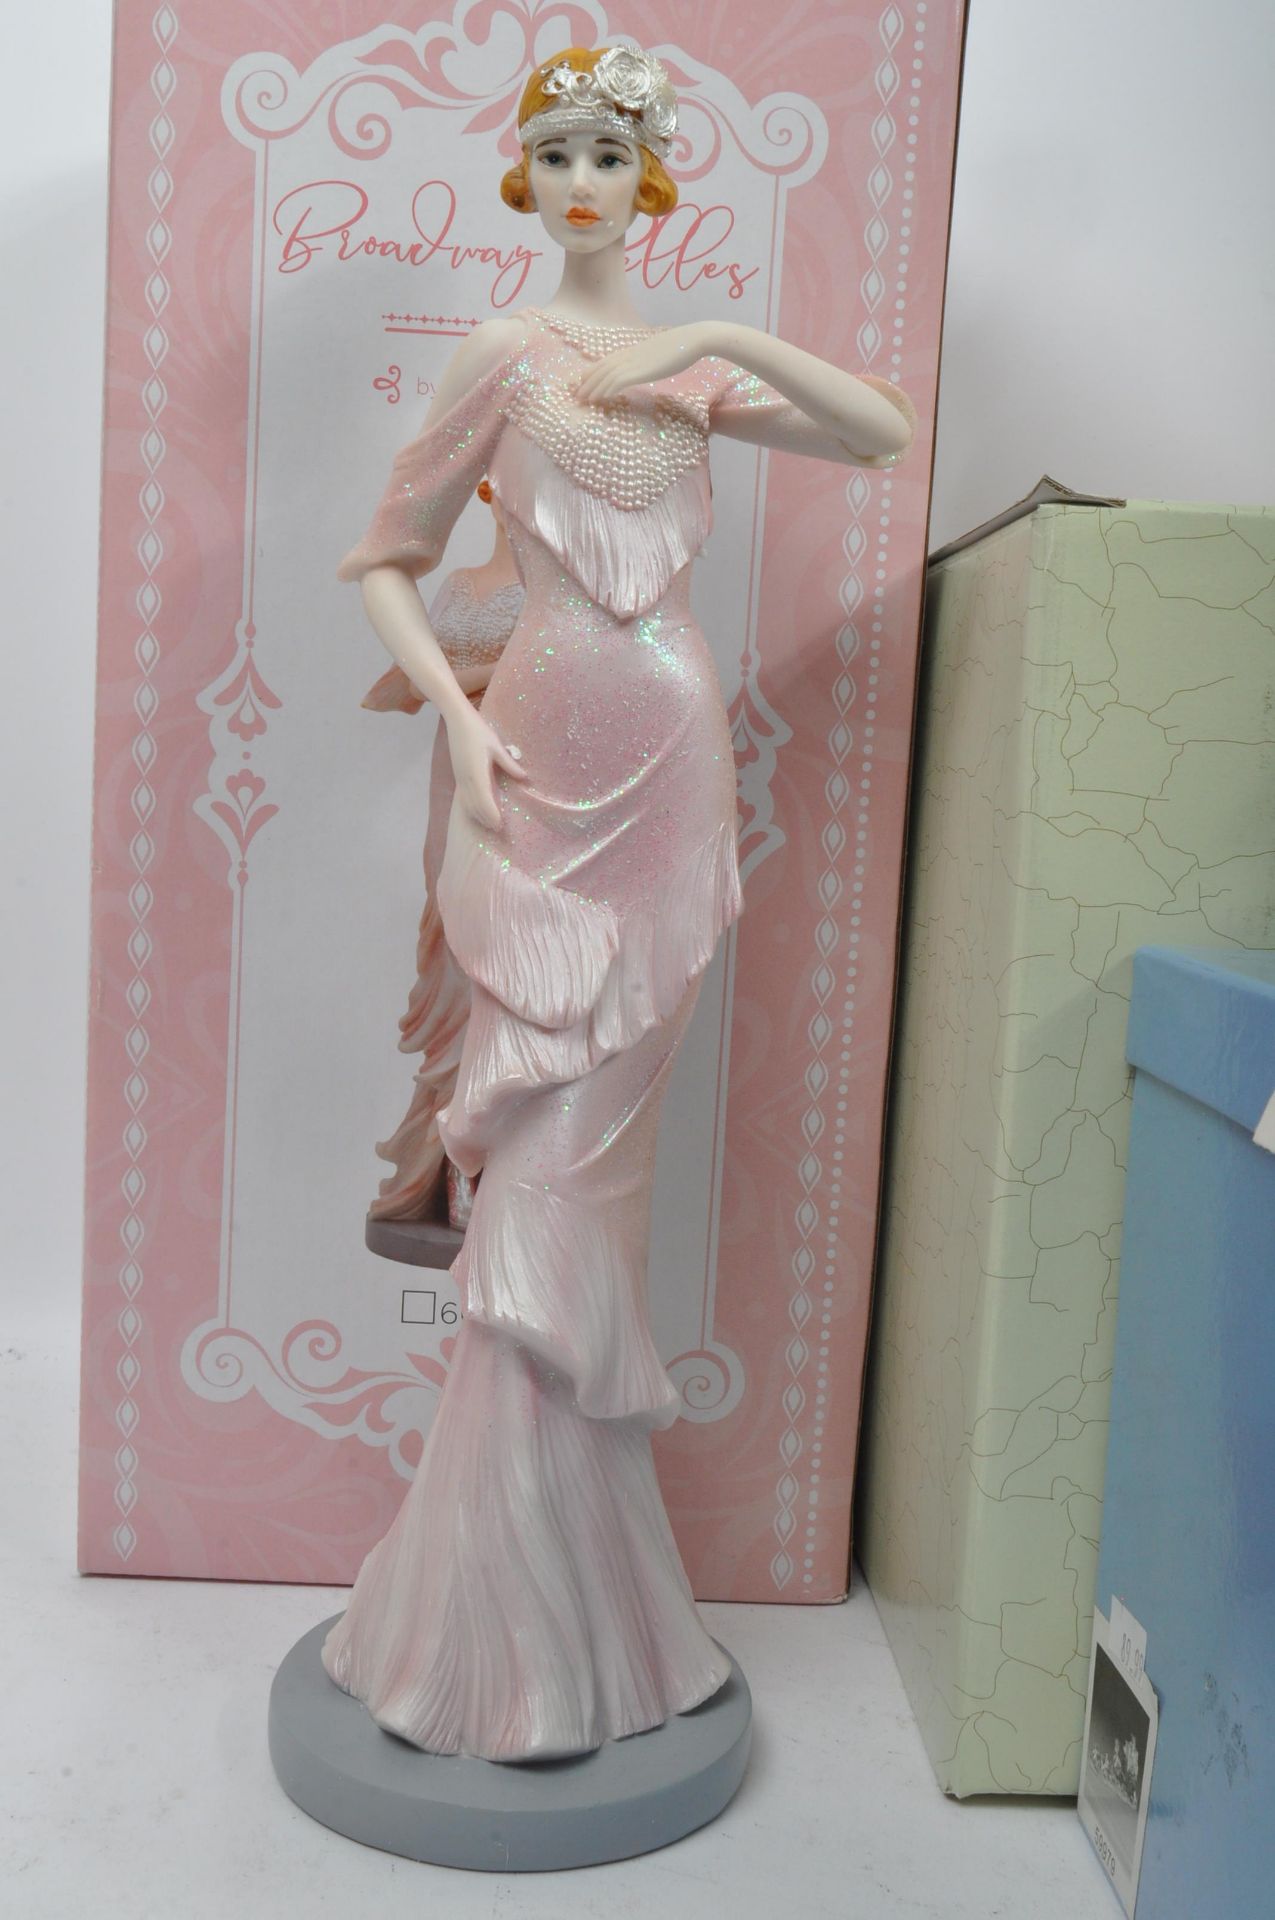 COLLECTION OF NOS BOXED LADY FIGURINES - Image 4 of 5